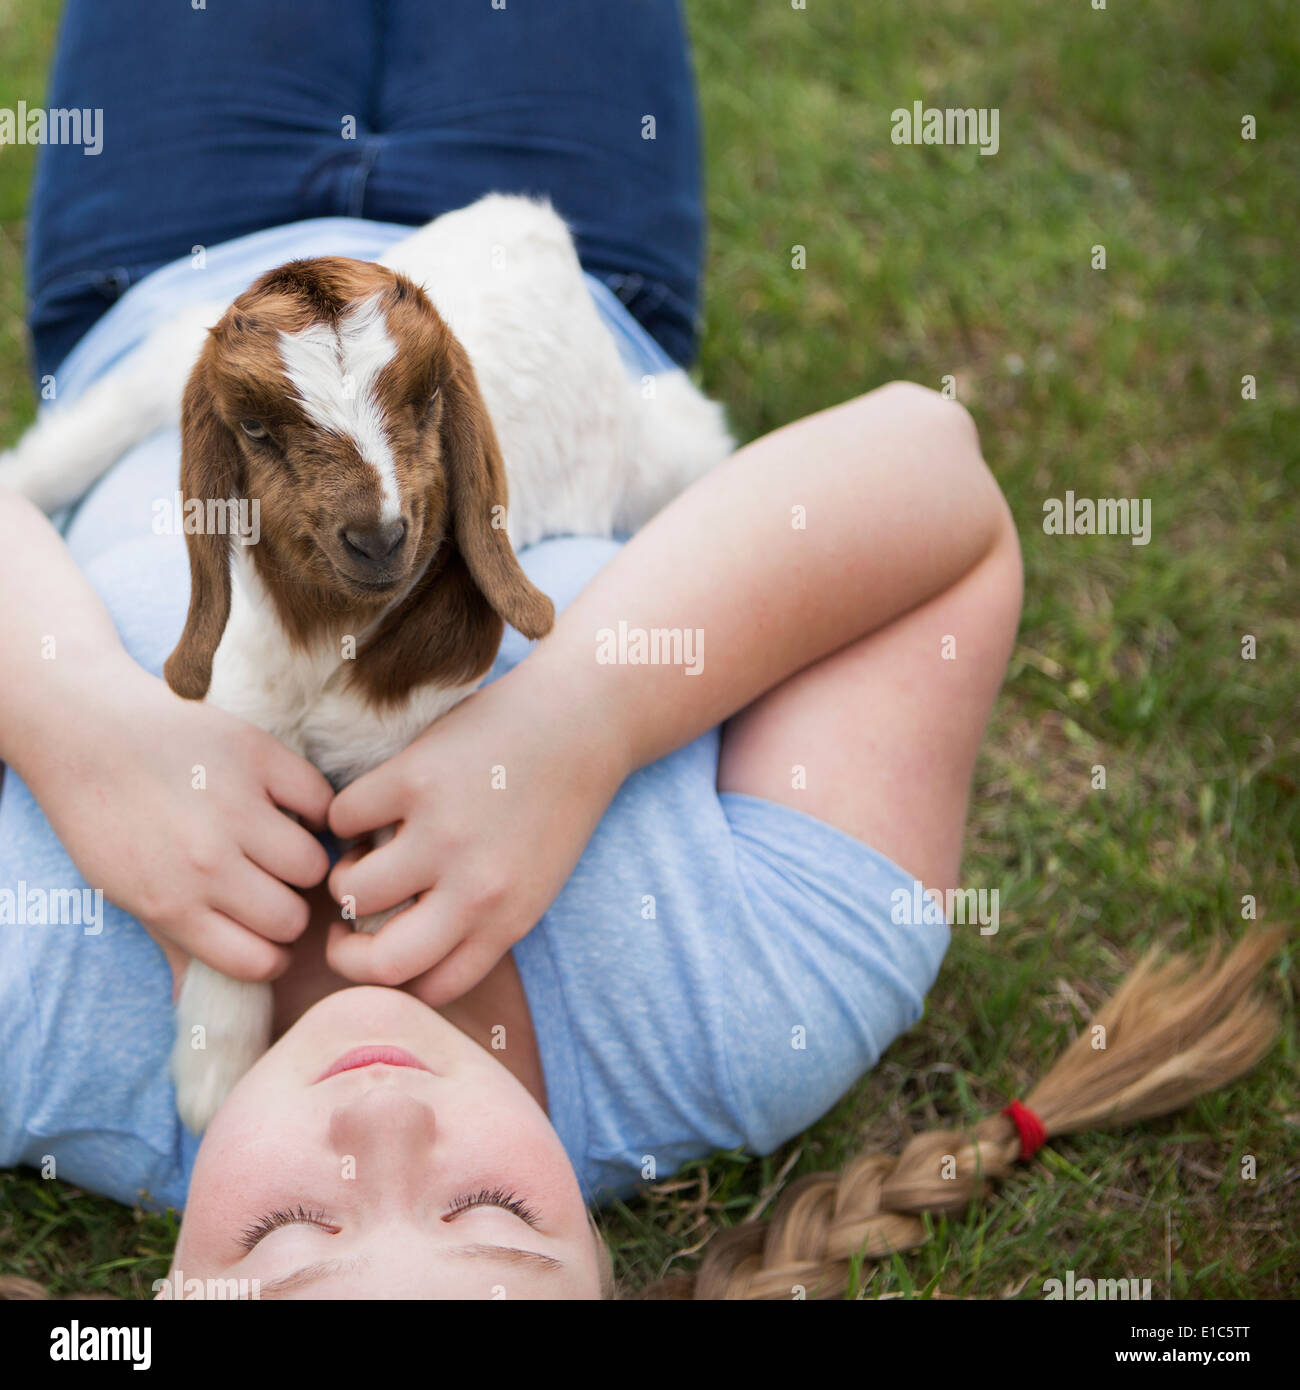 A girl cuddling a baby goat lying on her chest. Stock Photo